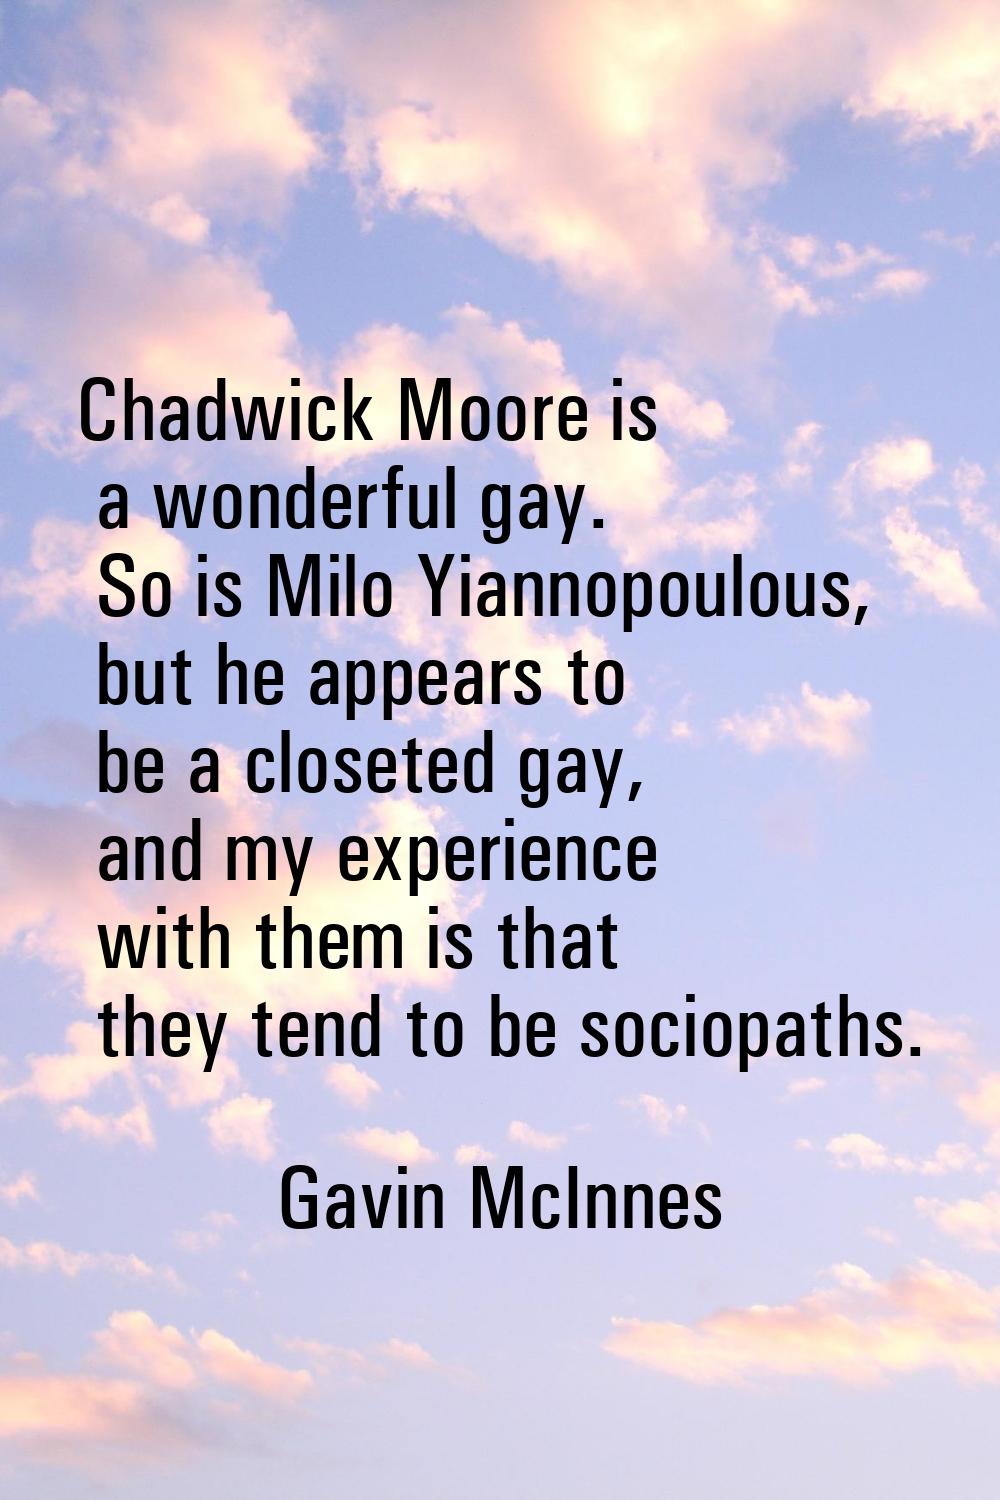 Chadwick Moore is a wonderful gay. So is Milo Yiannopoulous, but he appears to be a closeted gay, a